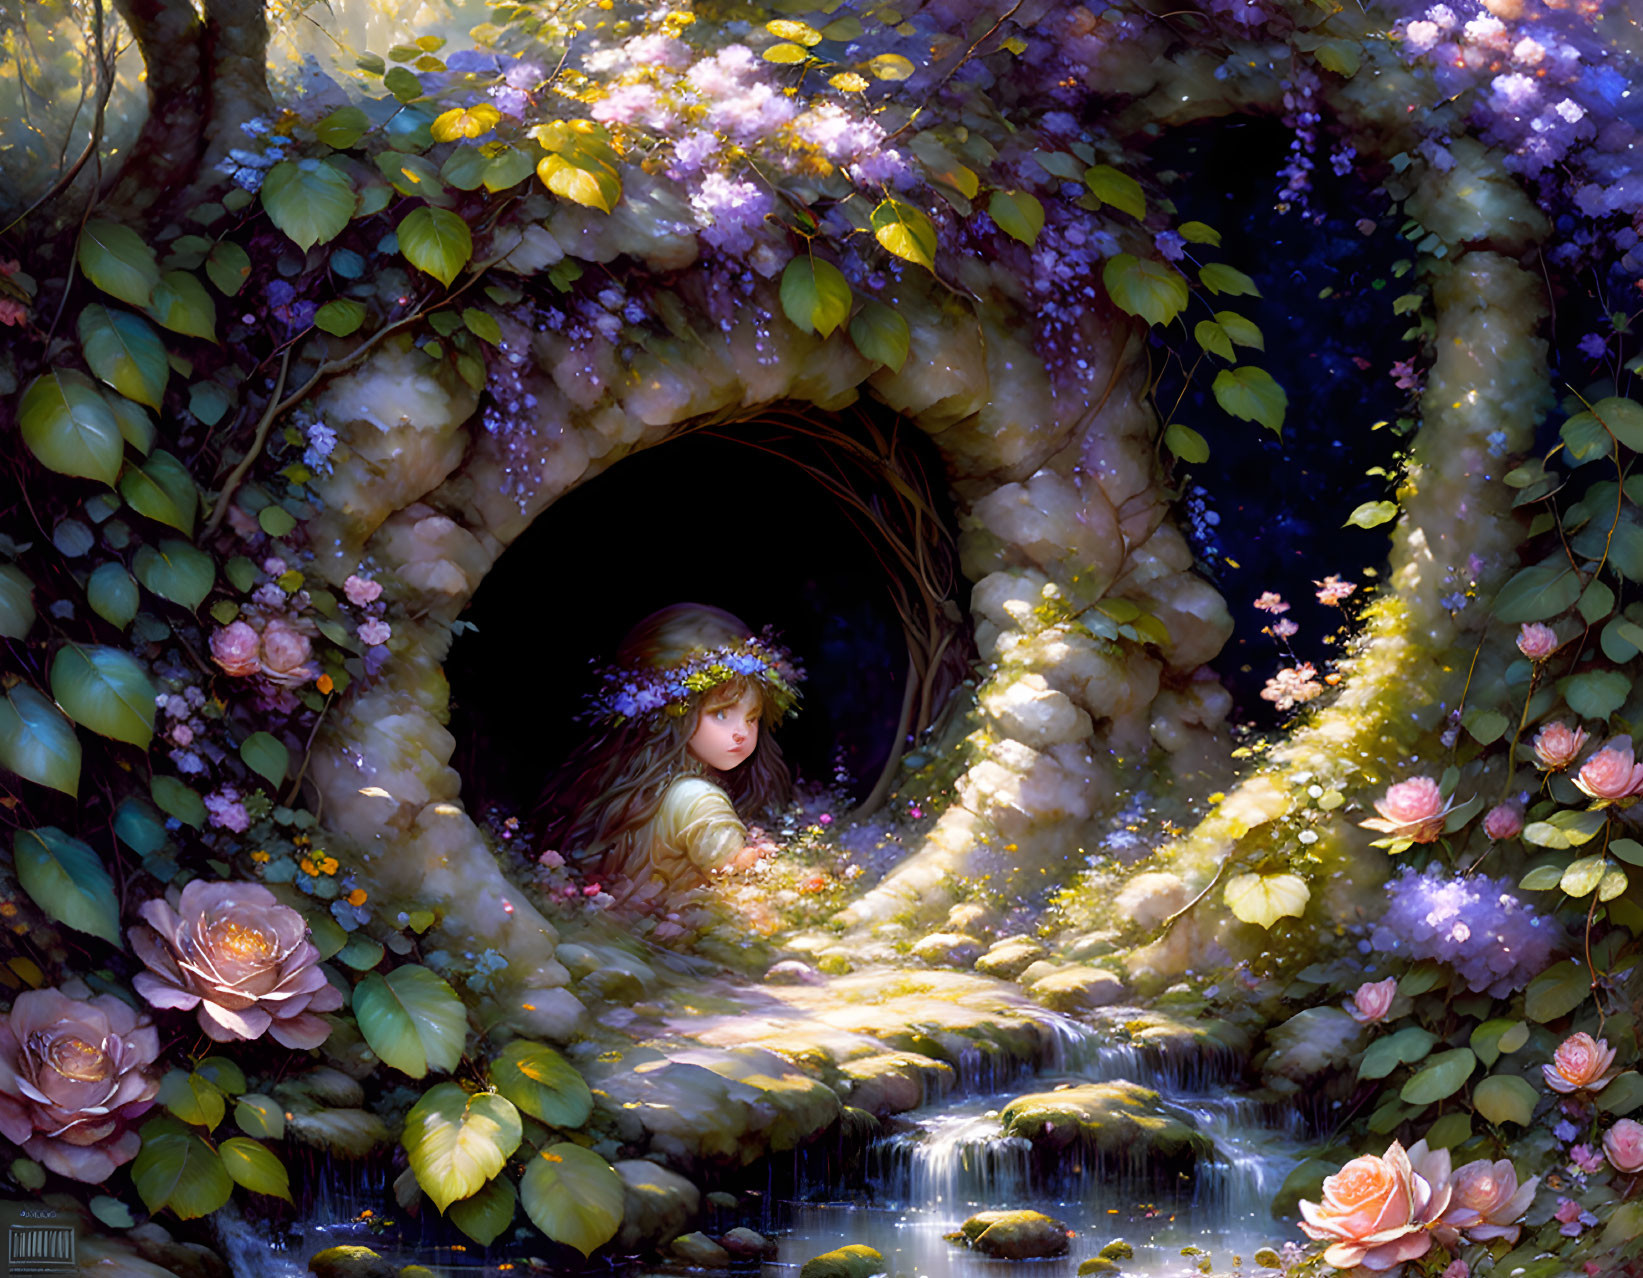 Fantastical forest illustration with girl in flower-hollow